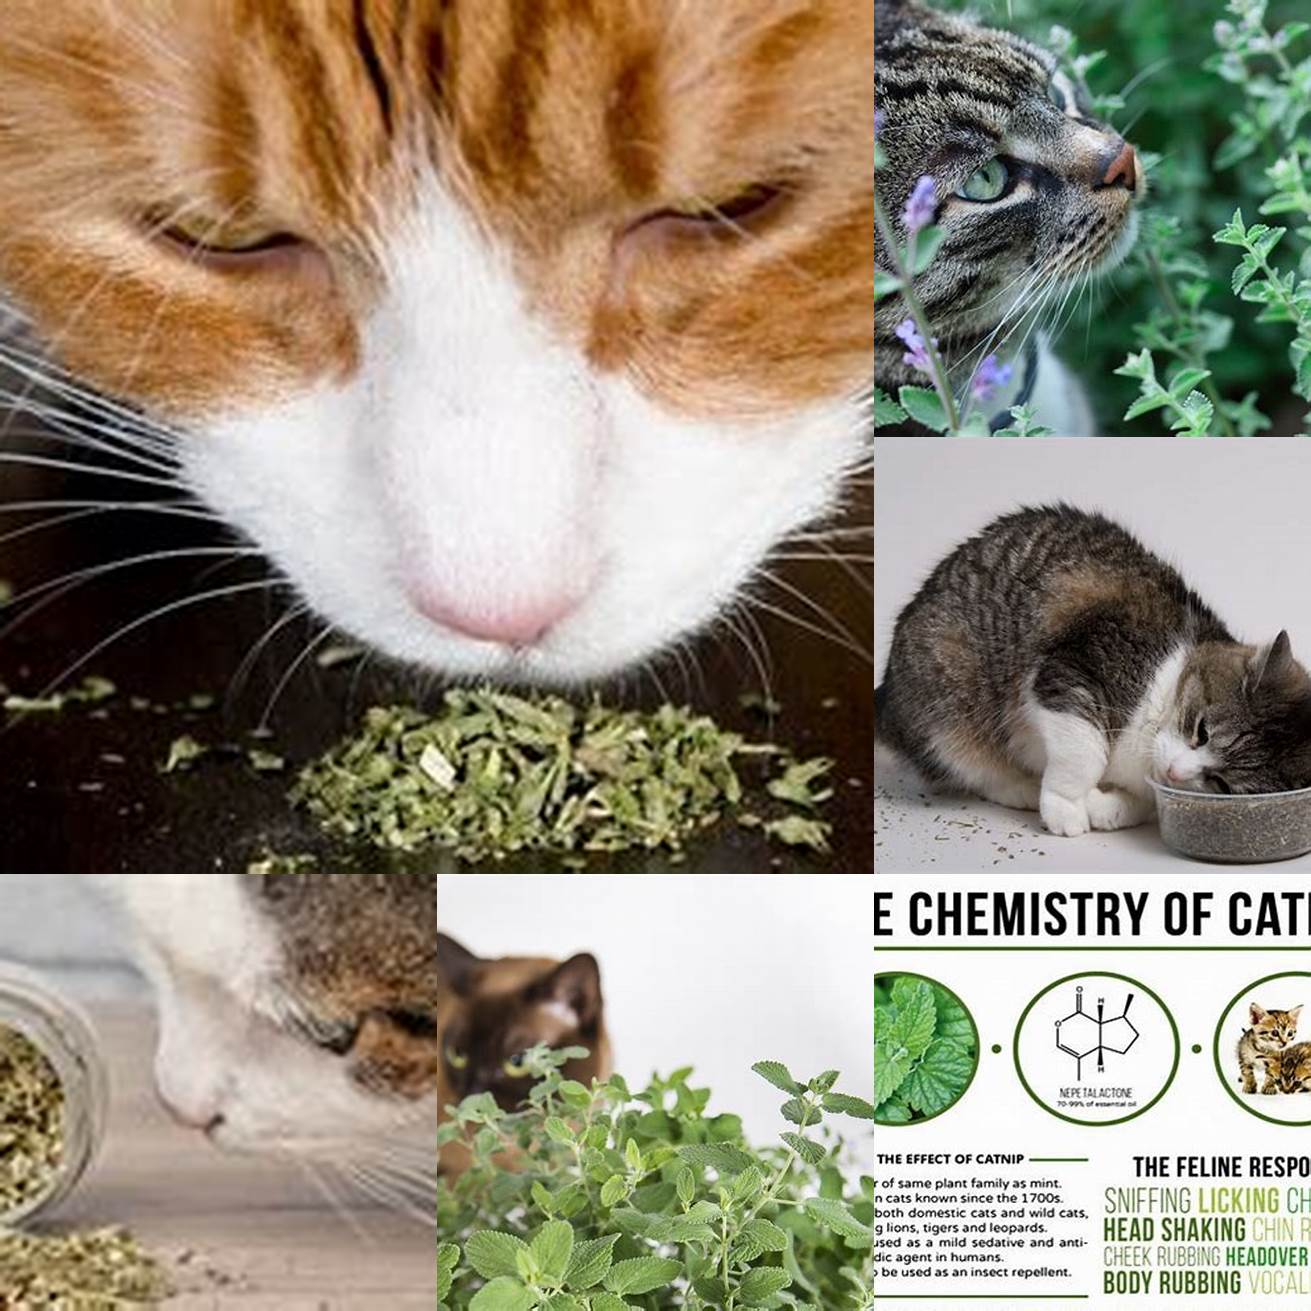 Providing sensory stimulation Catnip contains a compound called nepetalactone which triggers a response in cats olfactory system